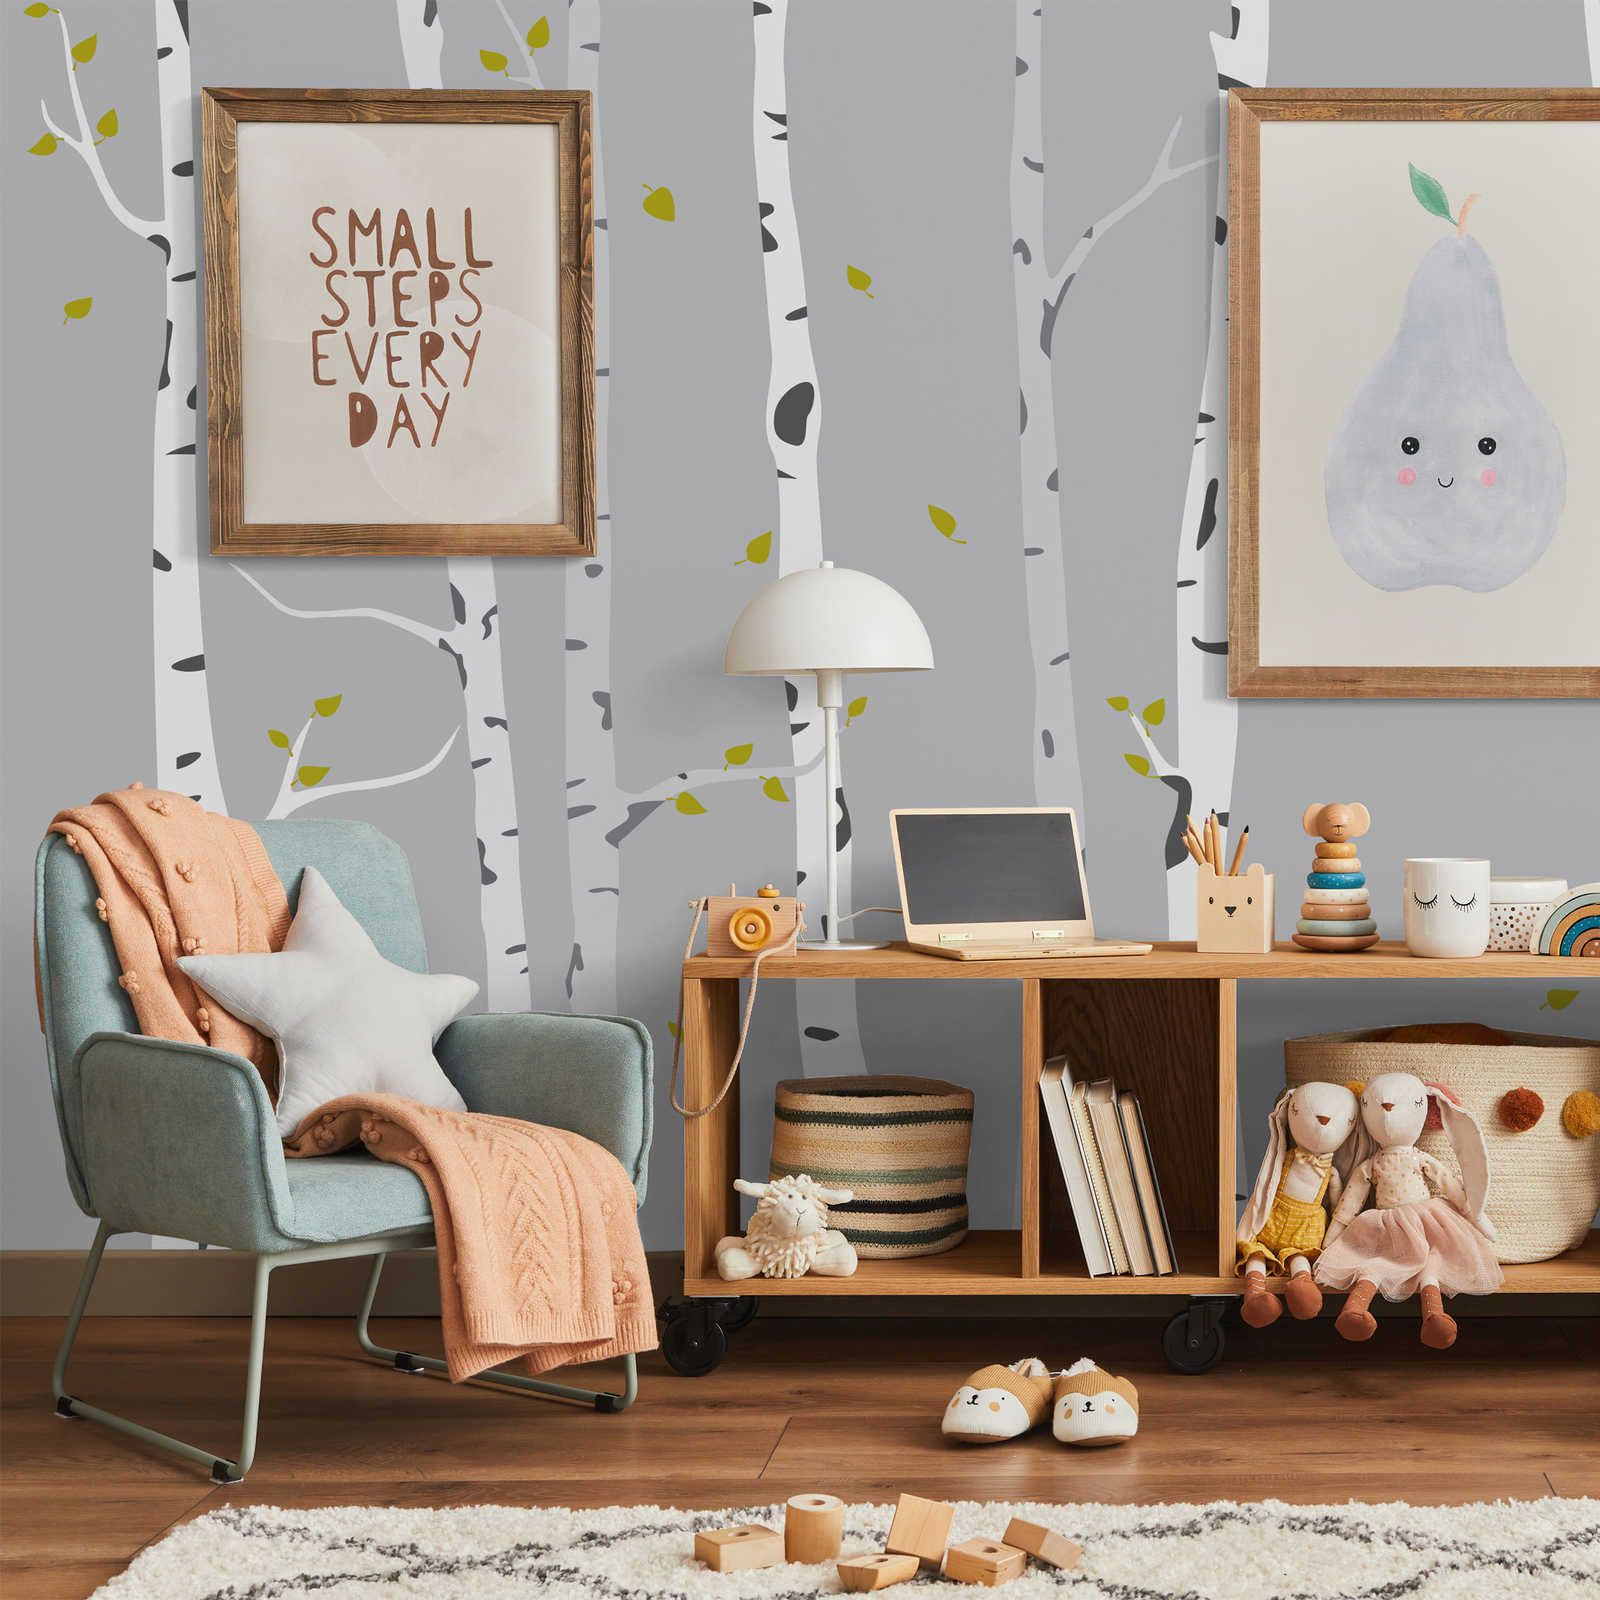 Photo wallpaper with painted birch forest for children's room - Smooth & pearlescent fleece
